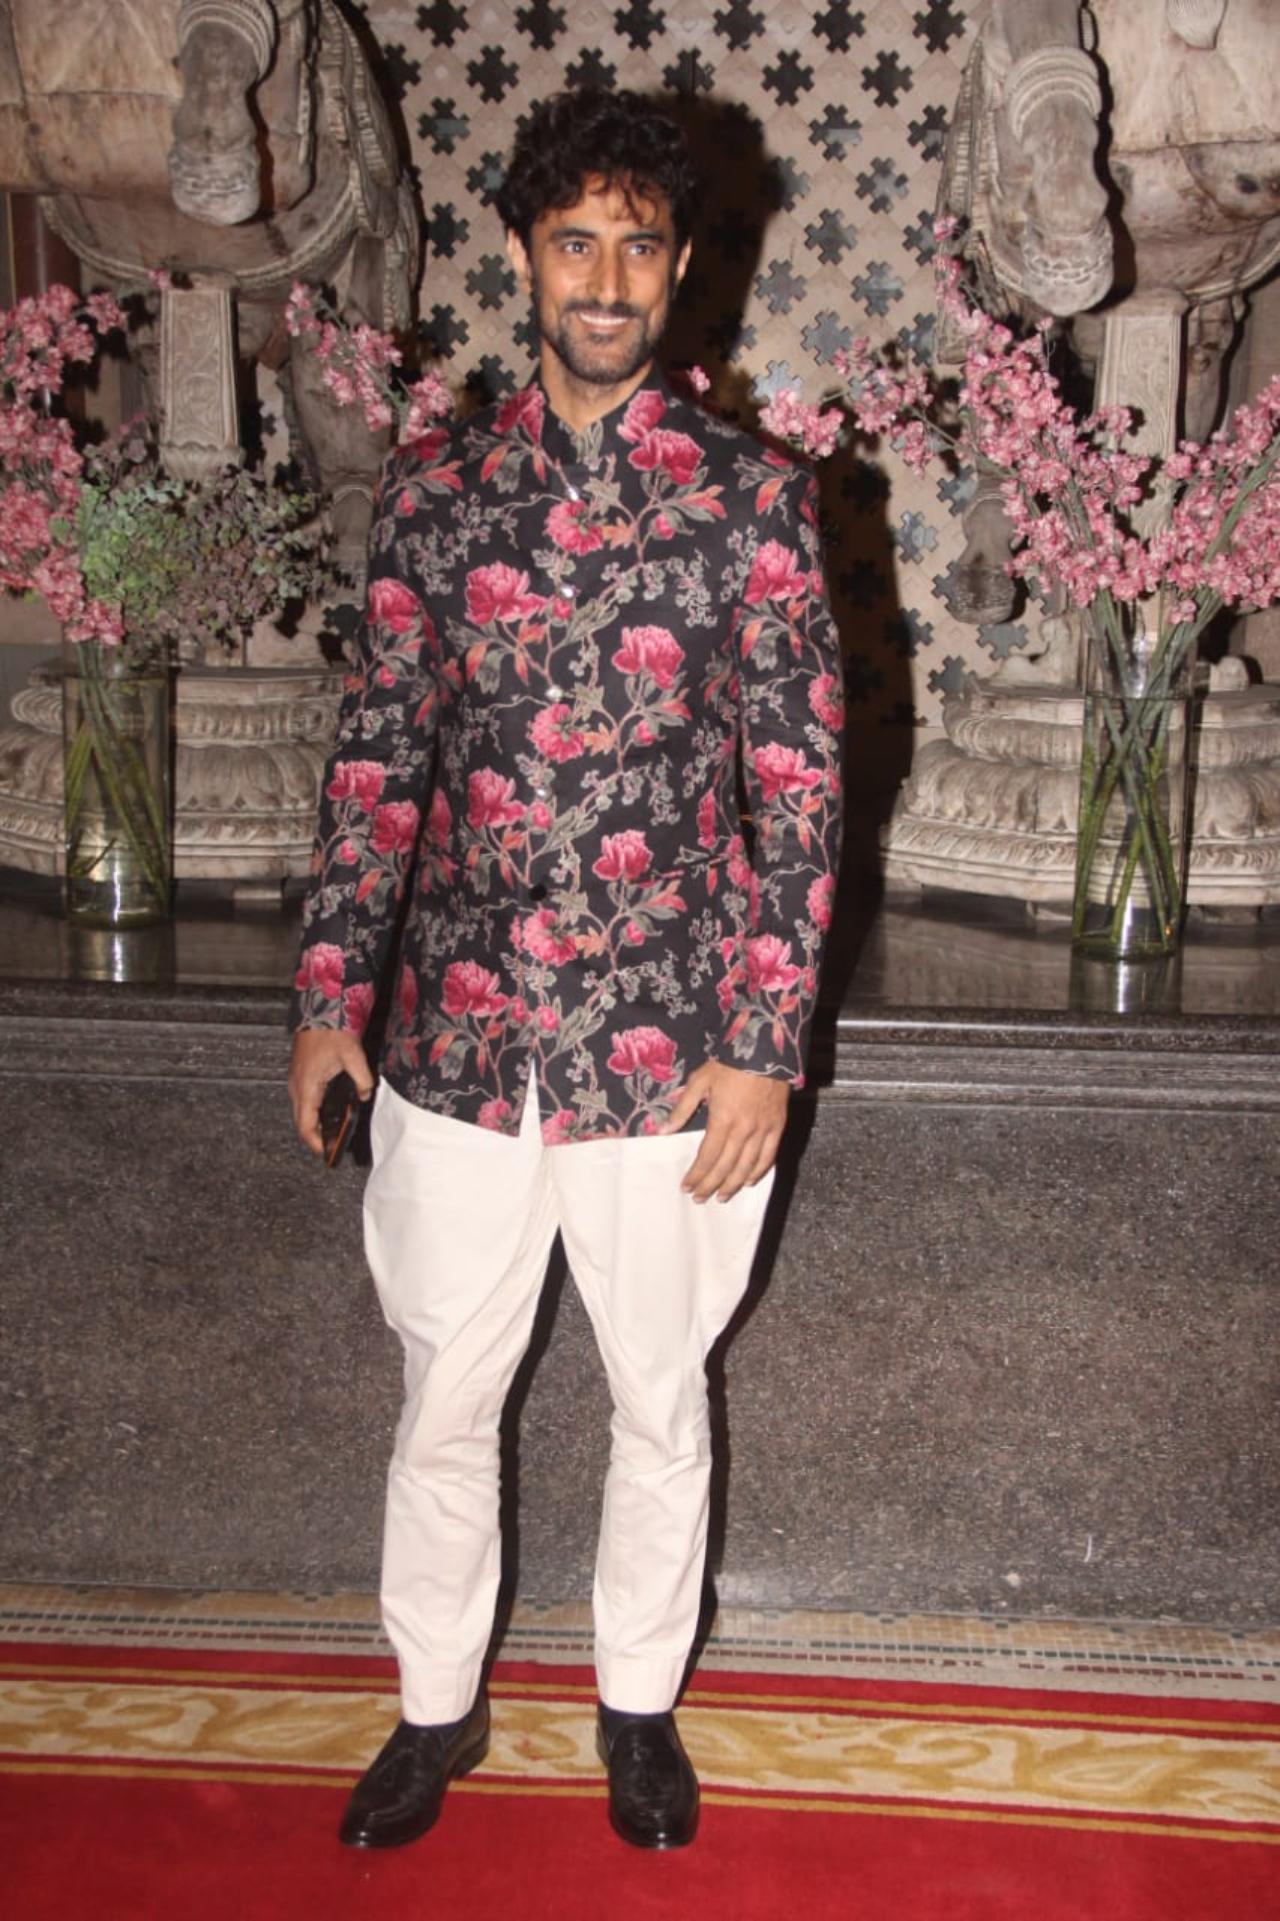 Kunal Kapoor went for a colourful printed kurta and white coloured dhoti styled pants